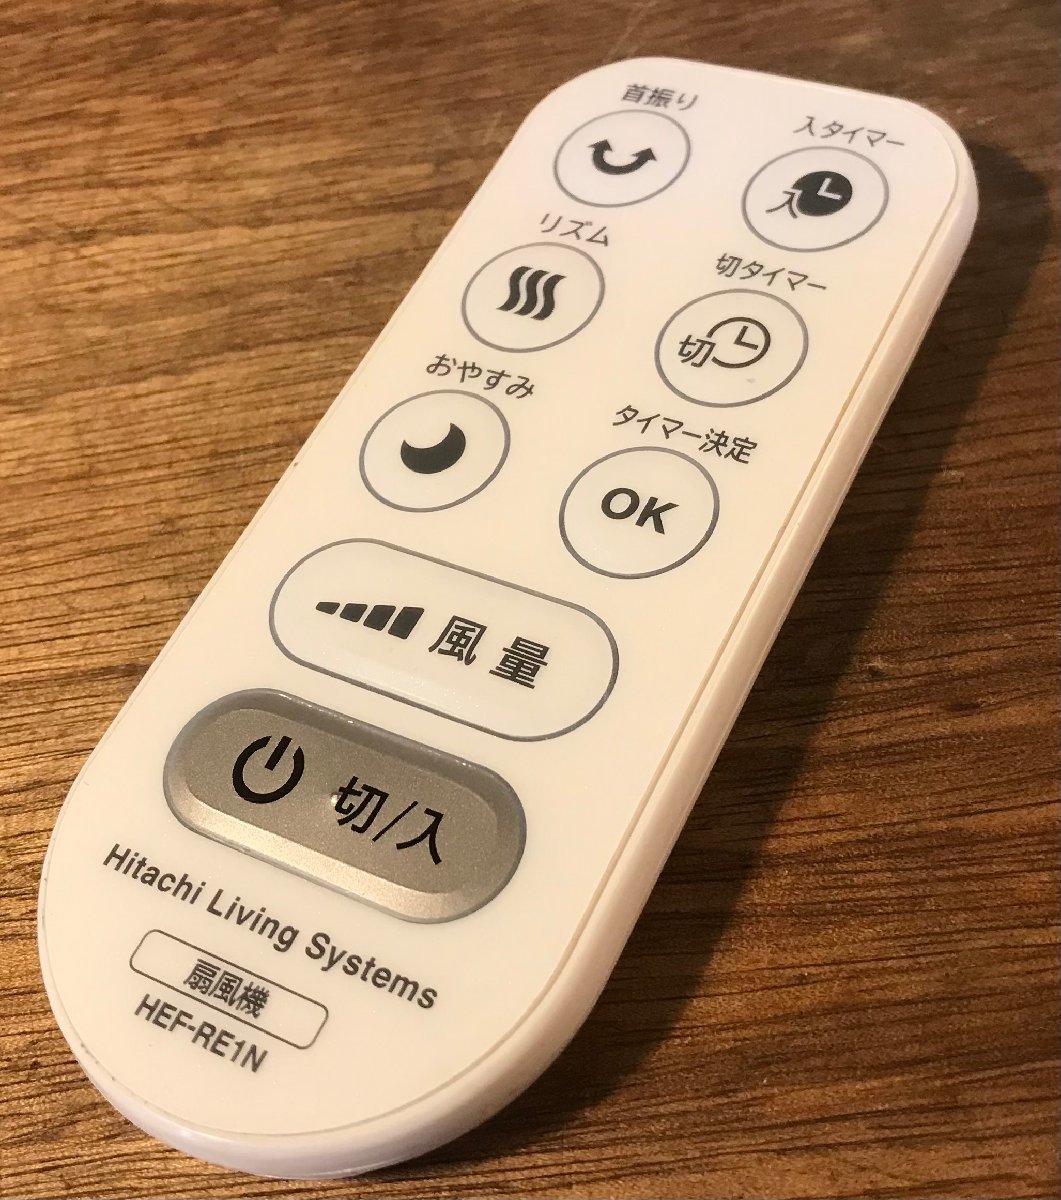 SS-1088# including carriage #Hitachi Living Systems electric fan HEF-RE1N remote control consumer electronics electrical appliances antique retro 37g* junk treatment /.AT.